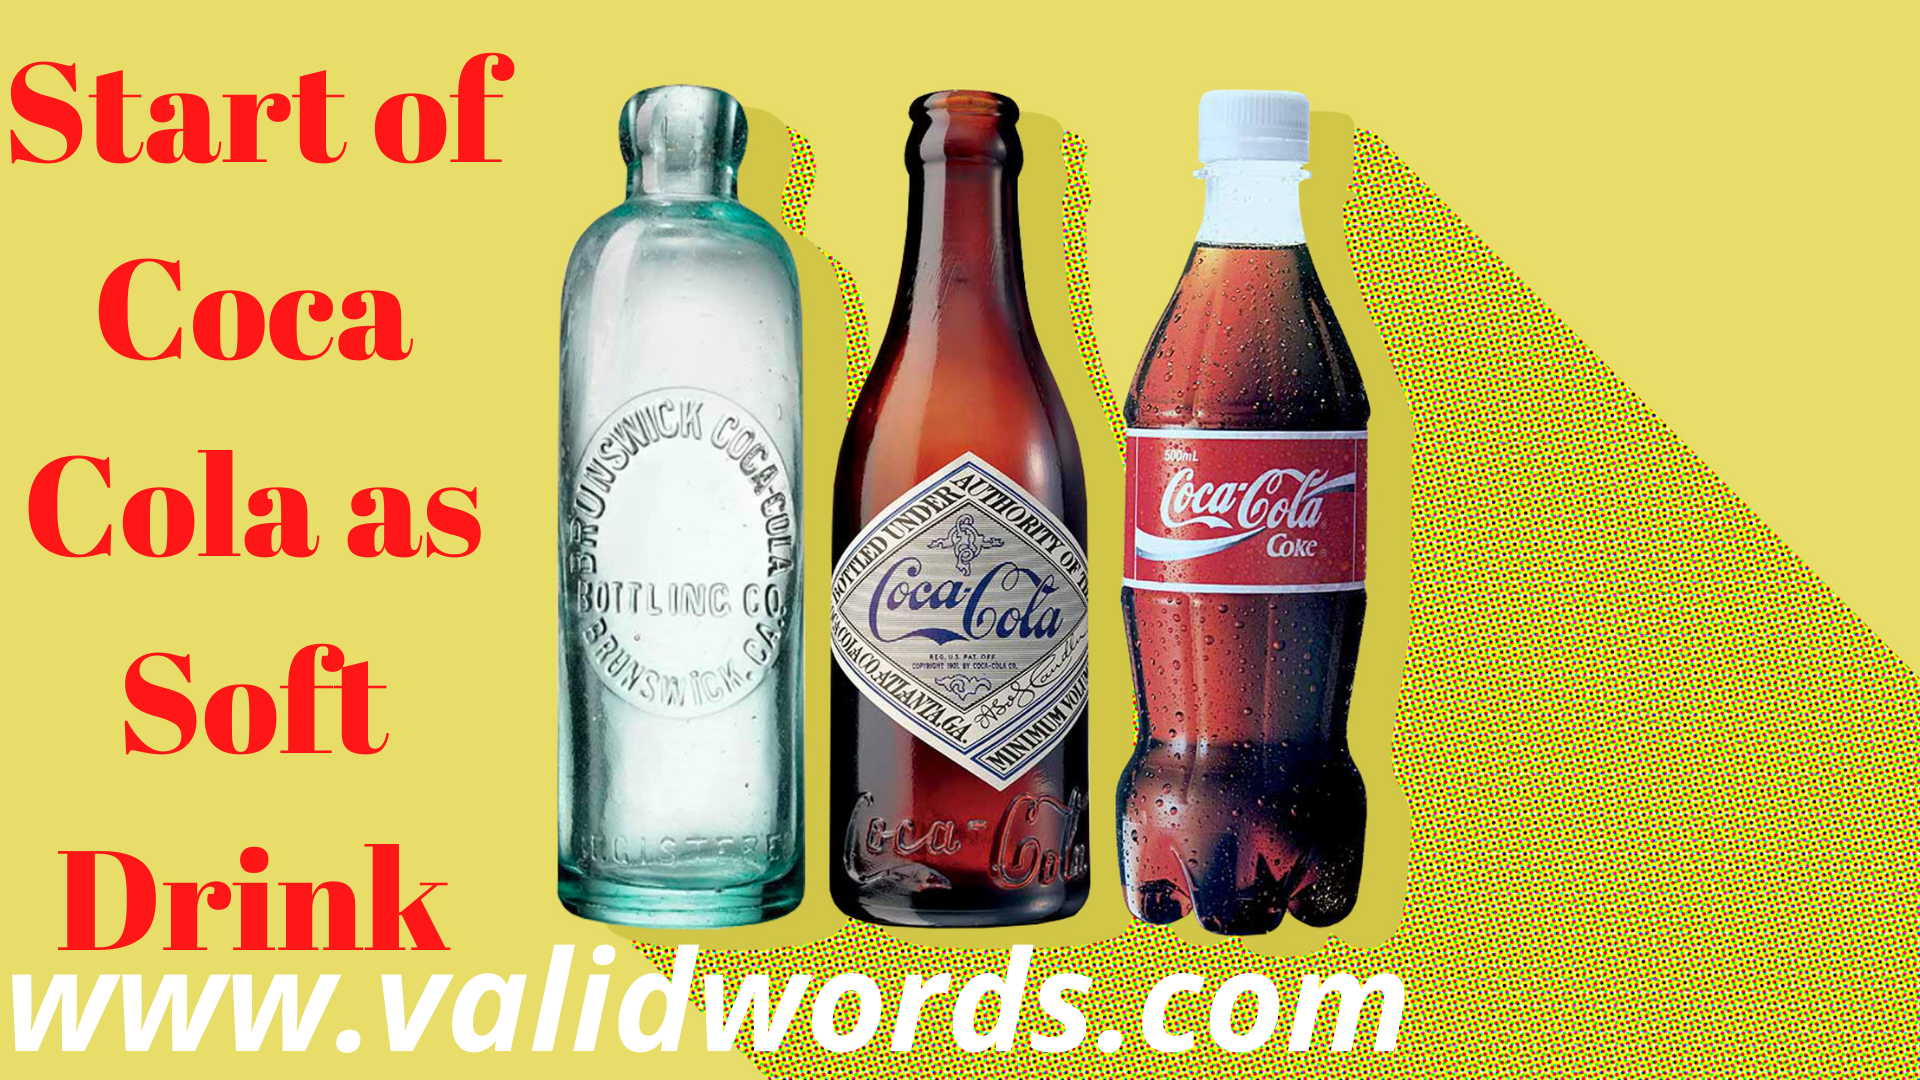 Start of coca cola as soft drink